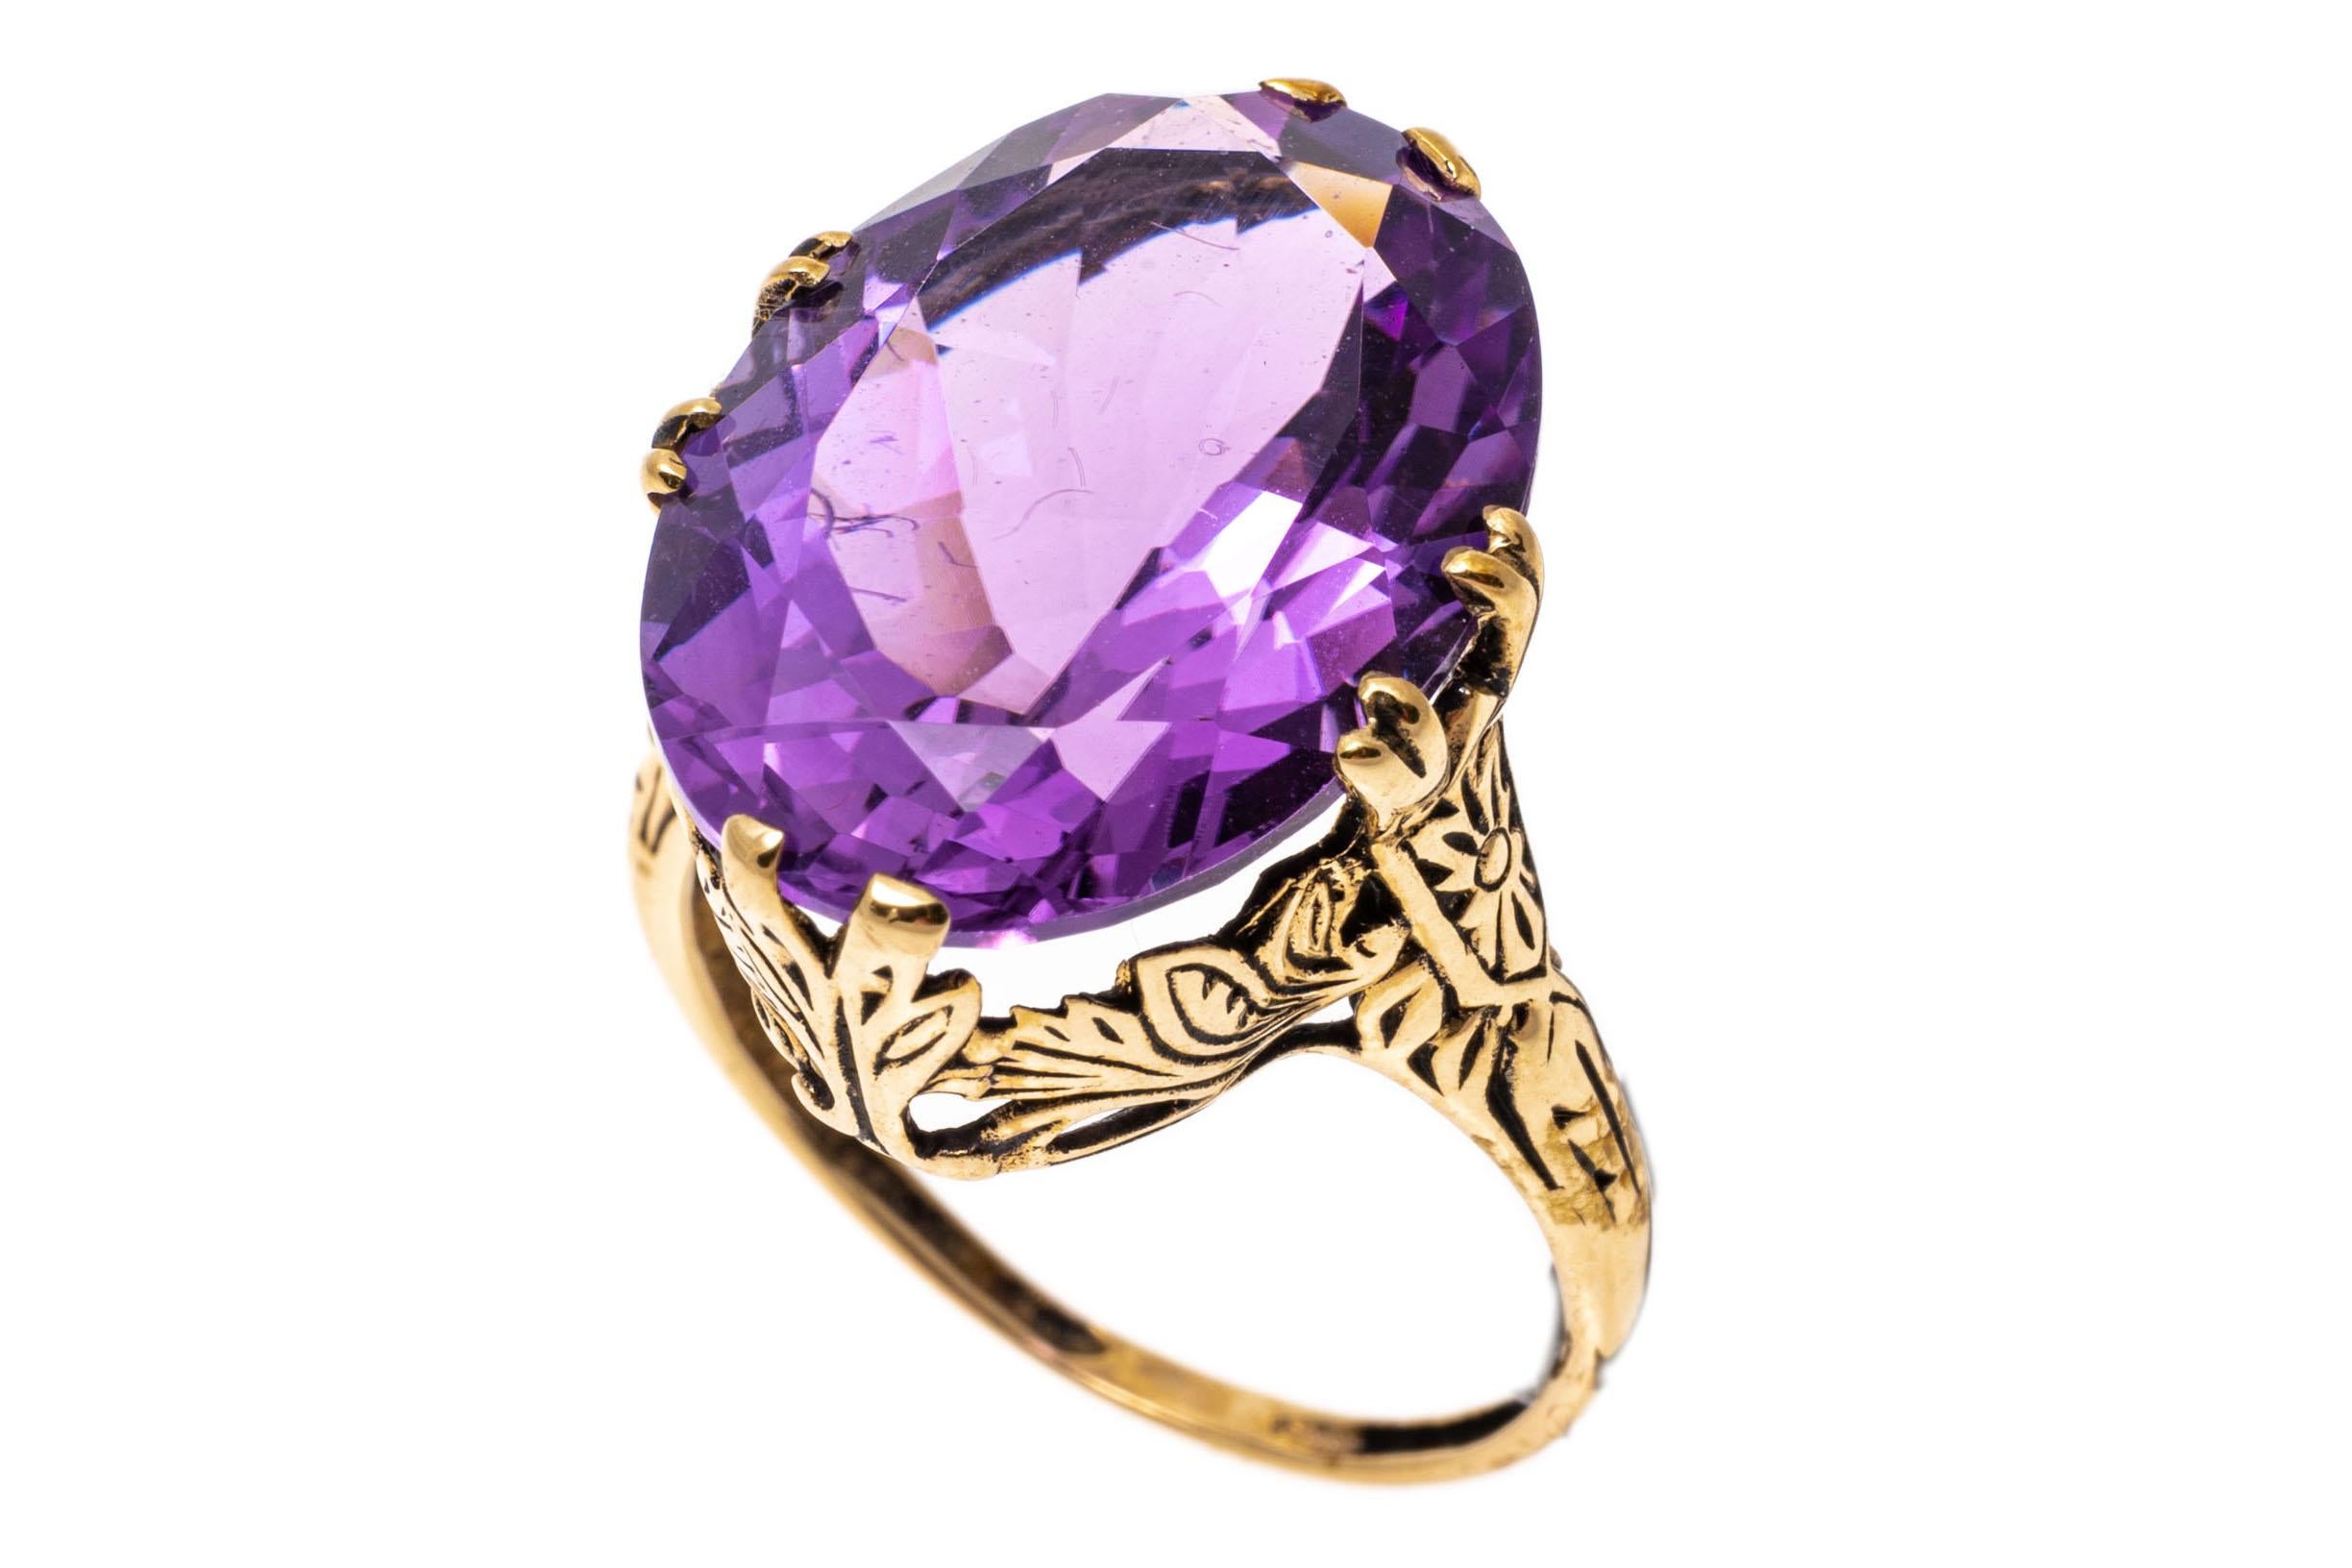 14k yellow gold ring. This beautiful, vintage ring has a large center oval faceted, medium to light purple color amethyst, approximately 10.94 CTS and set with foliate decorated split prongs, which lead into a lovely foliate gallery and patterned